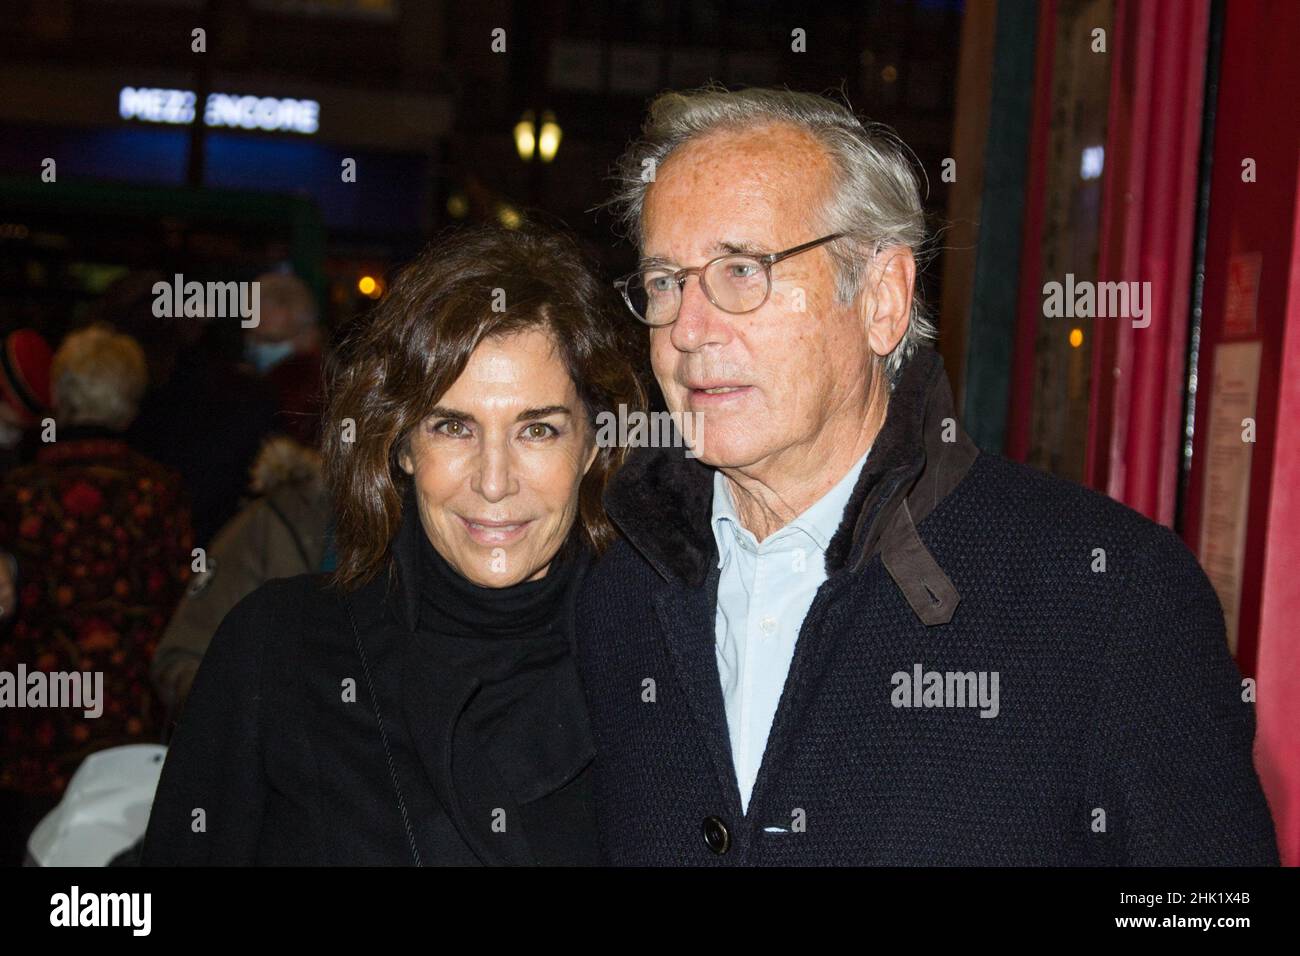 Paris, France. February 01, 2022, Christine and Olivier Orban attends The Writer Dany Laferriere, From The French Academy Unveils His Wax Figure at the Musee Grevin on February 01, 2022 in Paris, France. Photo by Nasser Berzane/ABACAPRESS.COM Stock Photo